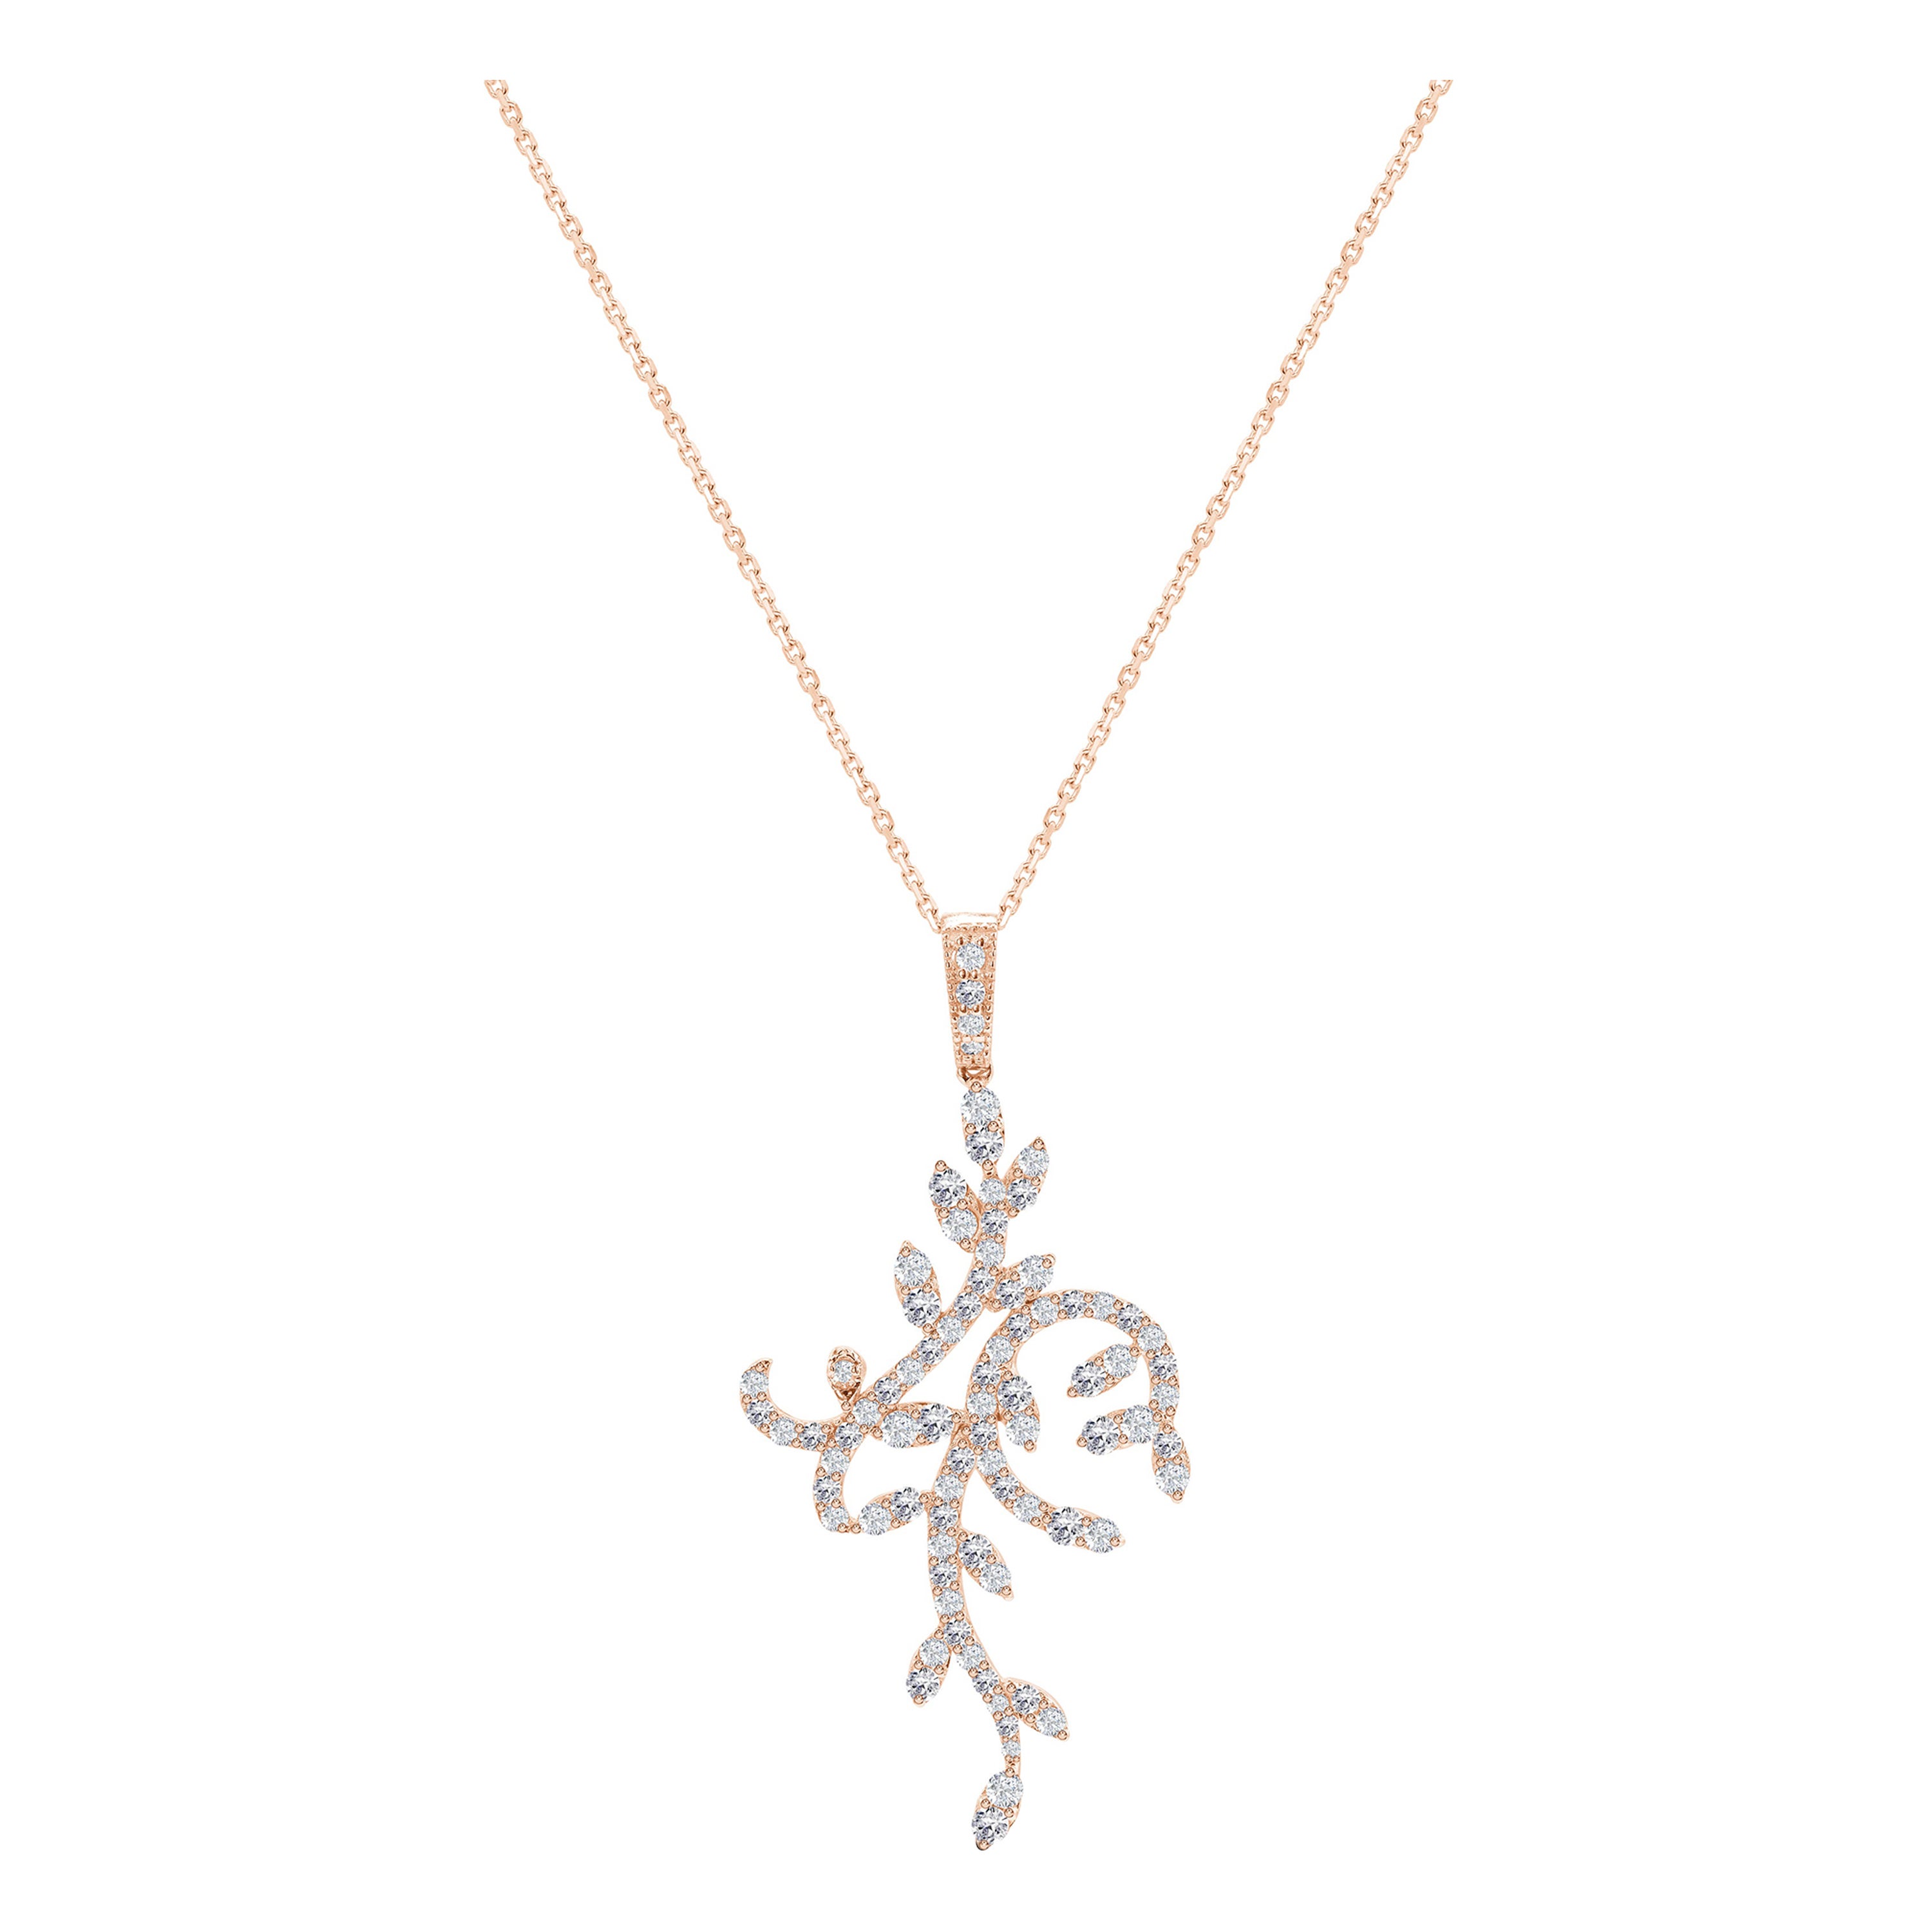 1.35 Ct Diamond Leaf Necklace in 18K Gold For Sale